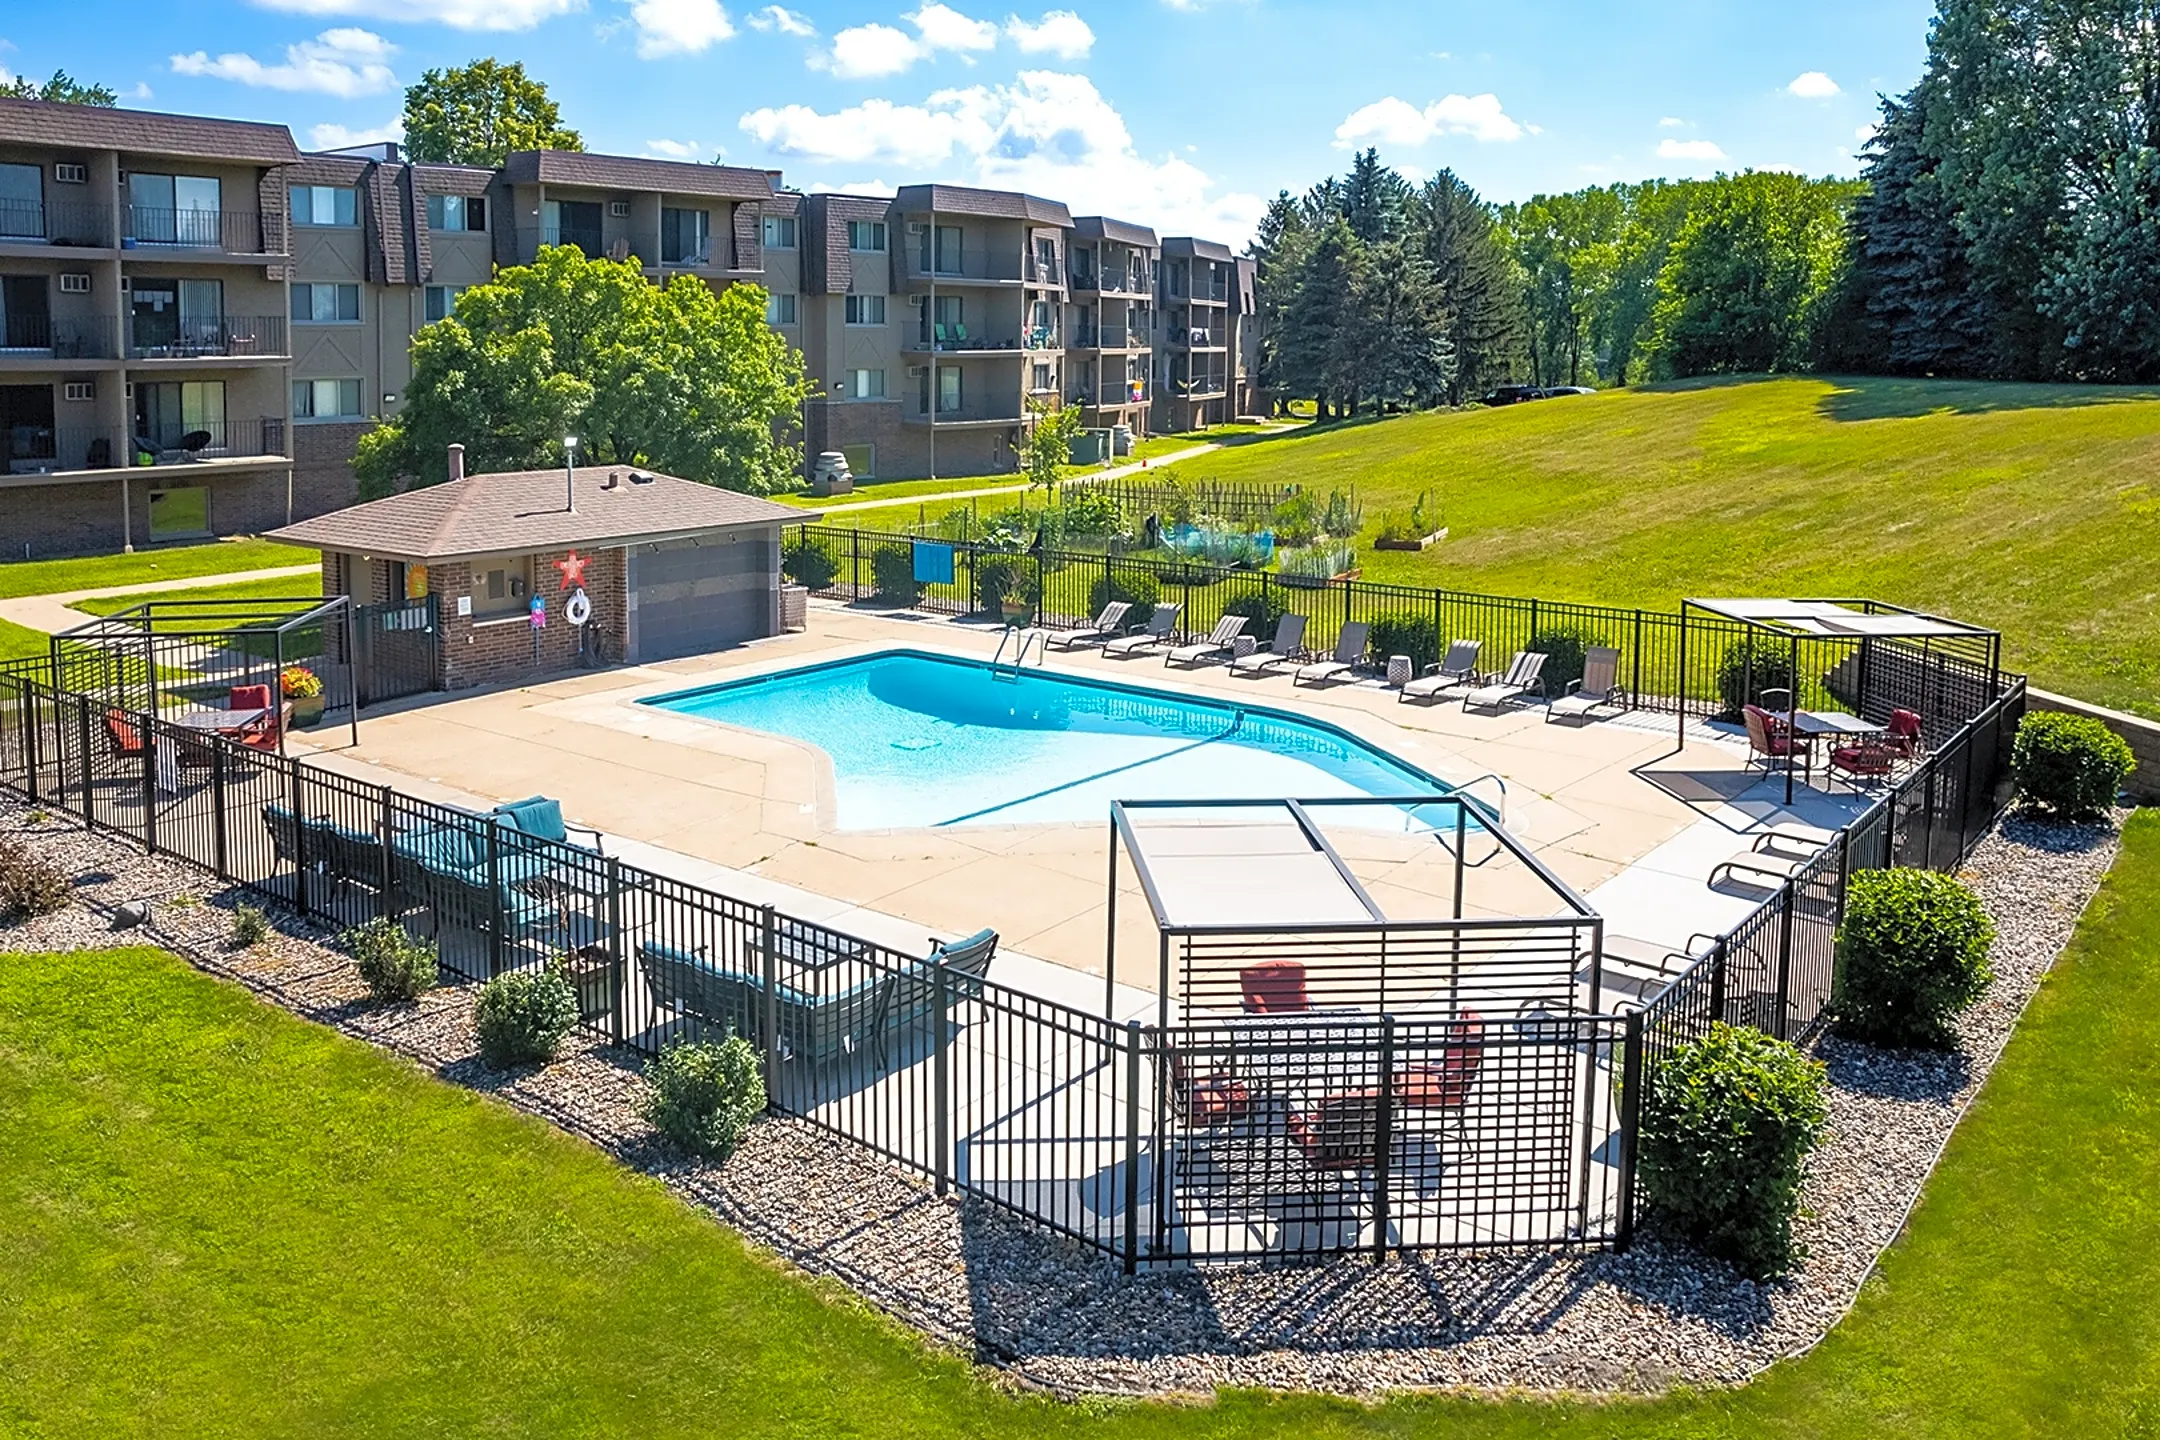 Pool - Palisades Apartments - Roseville, MN